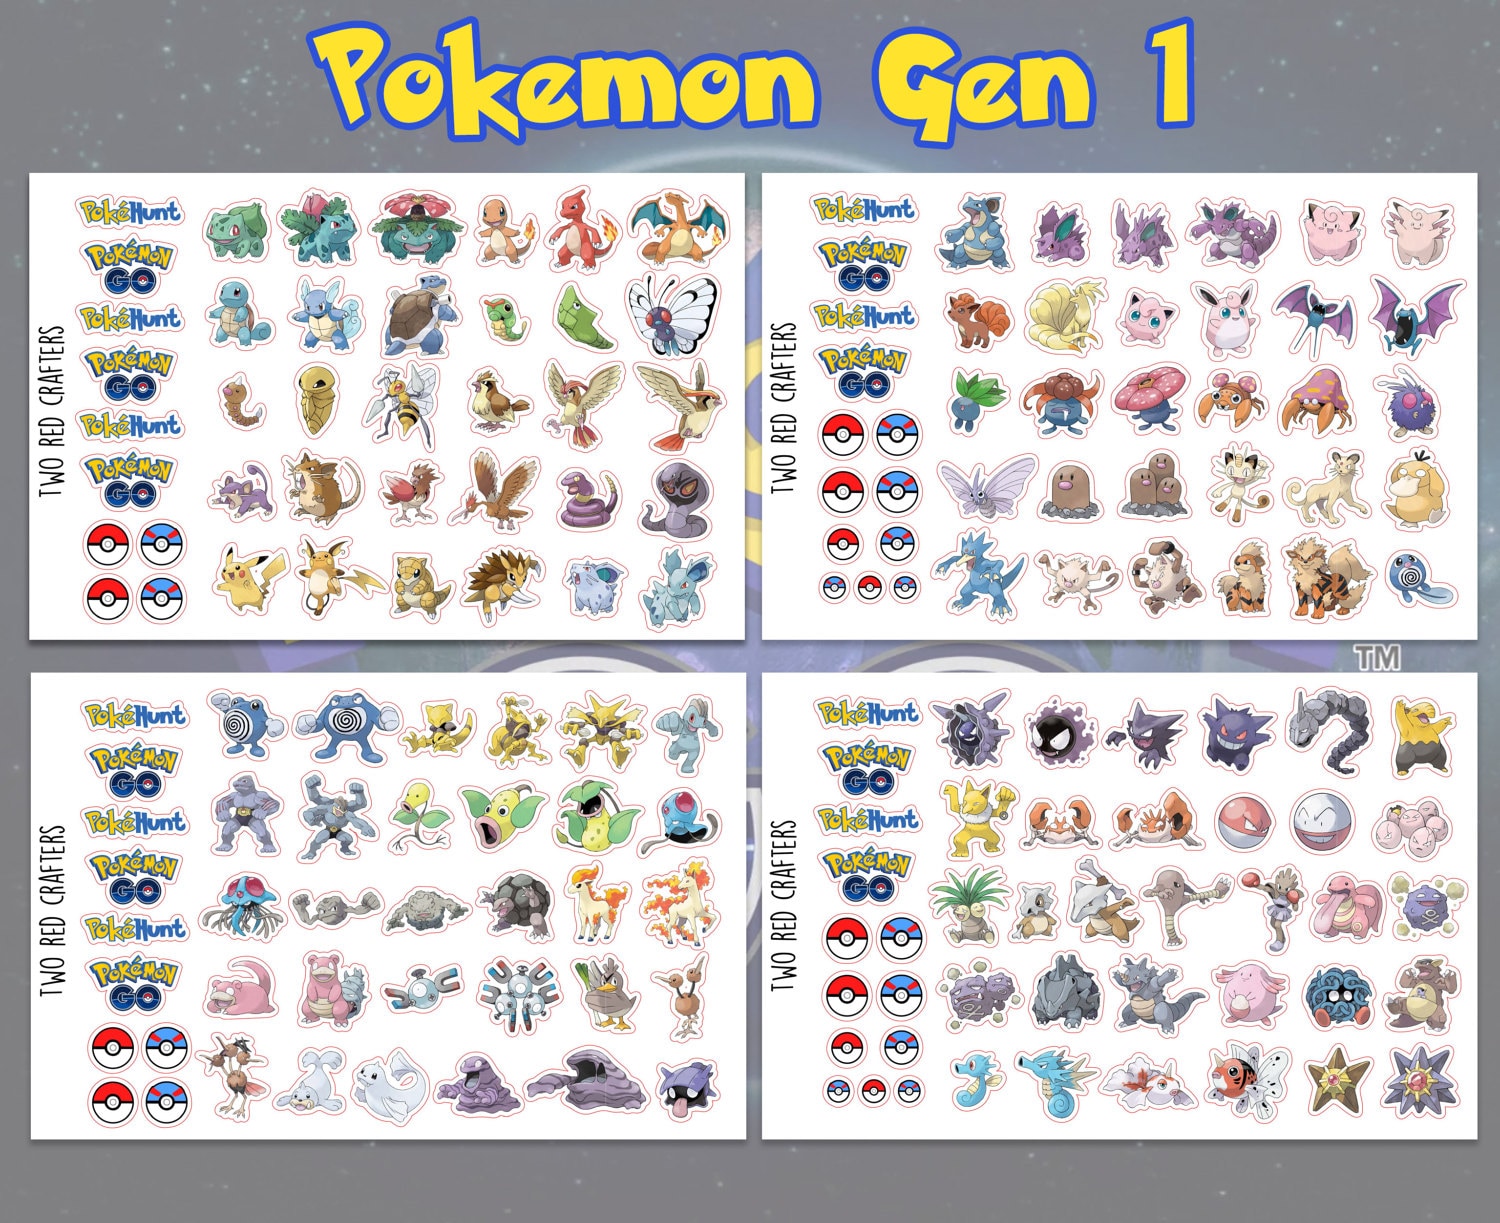 Blue Hair Pokemon Gen 4: The Ultimate Guide to Blue-Haired Pokemon in Generation 4 - wide 6